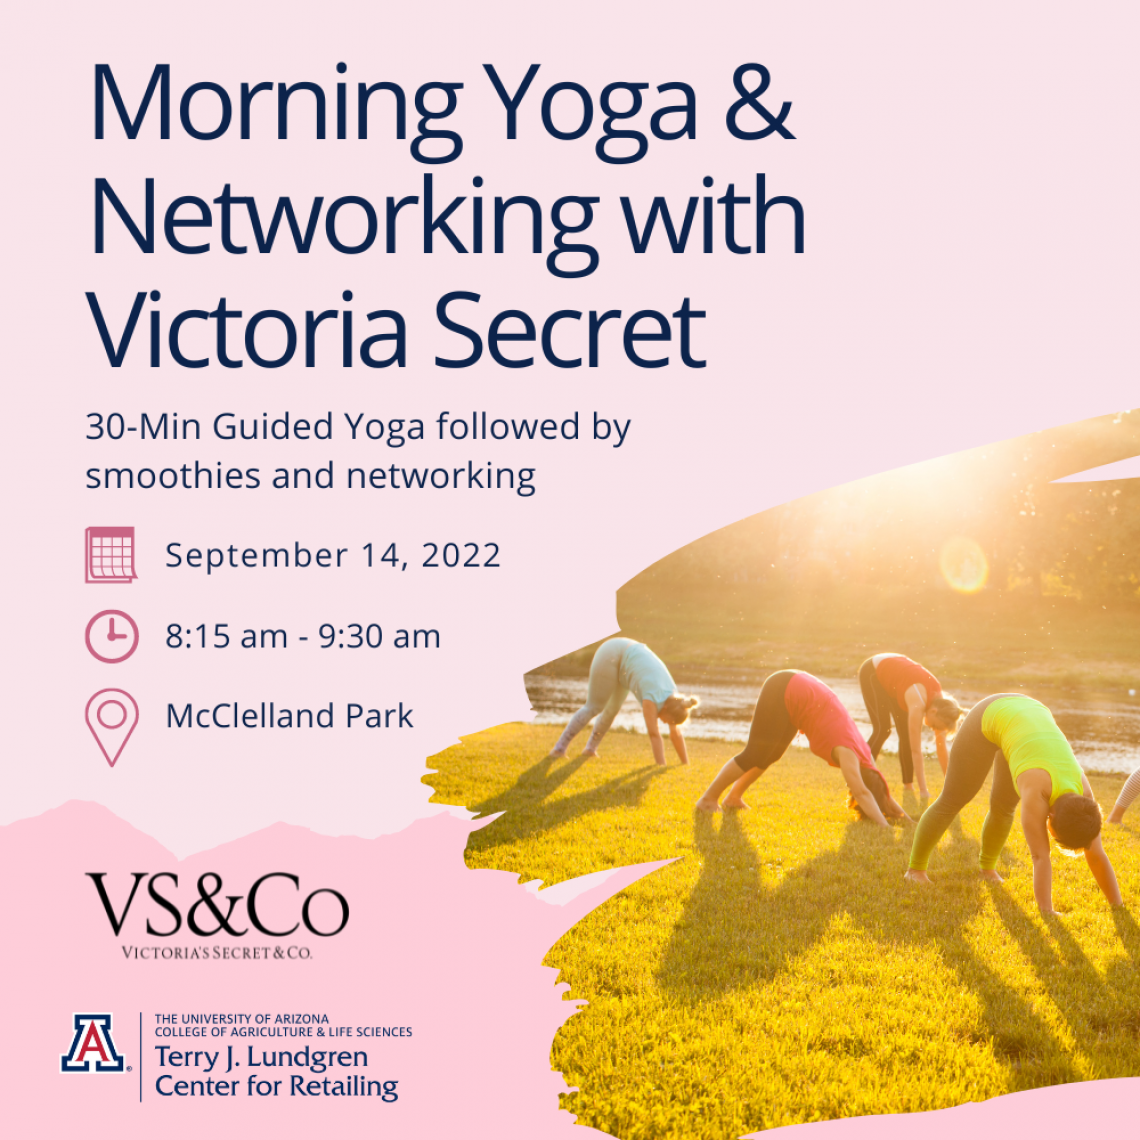 Morning Yoga & Networking with Victoria Secret 